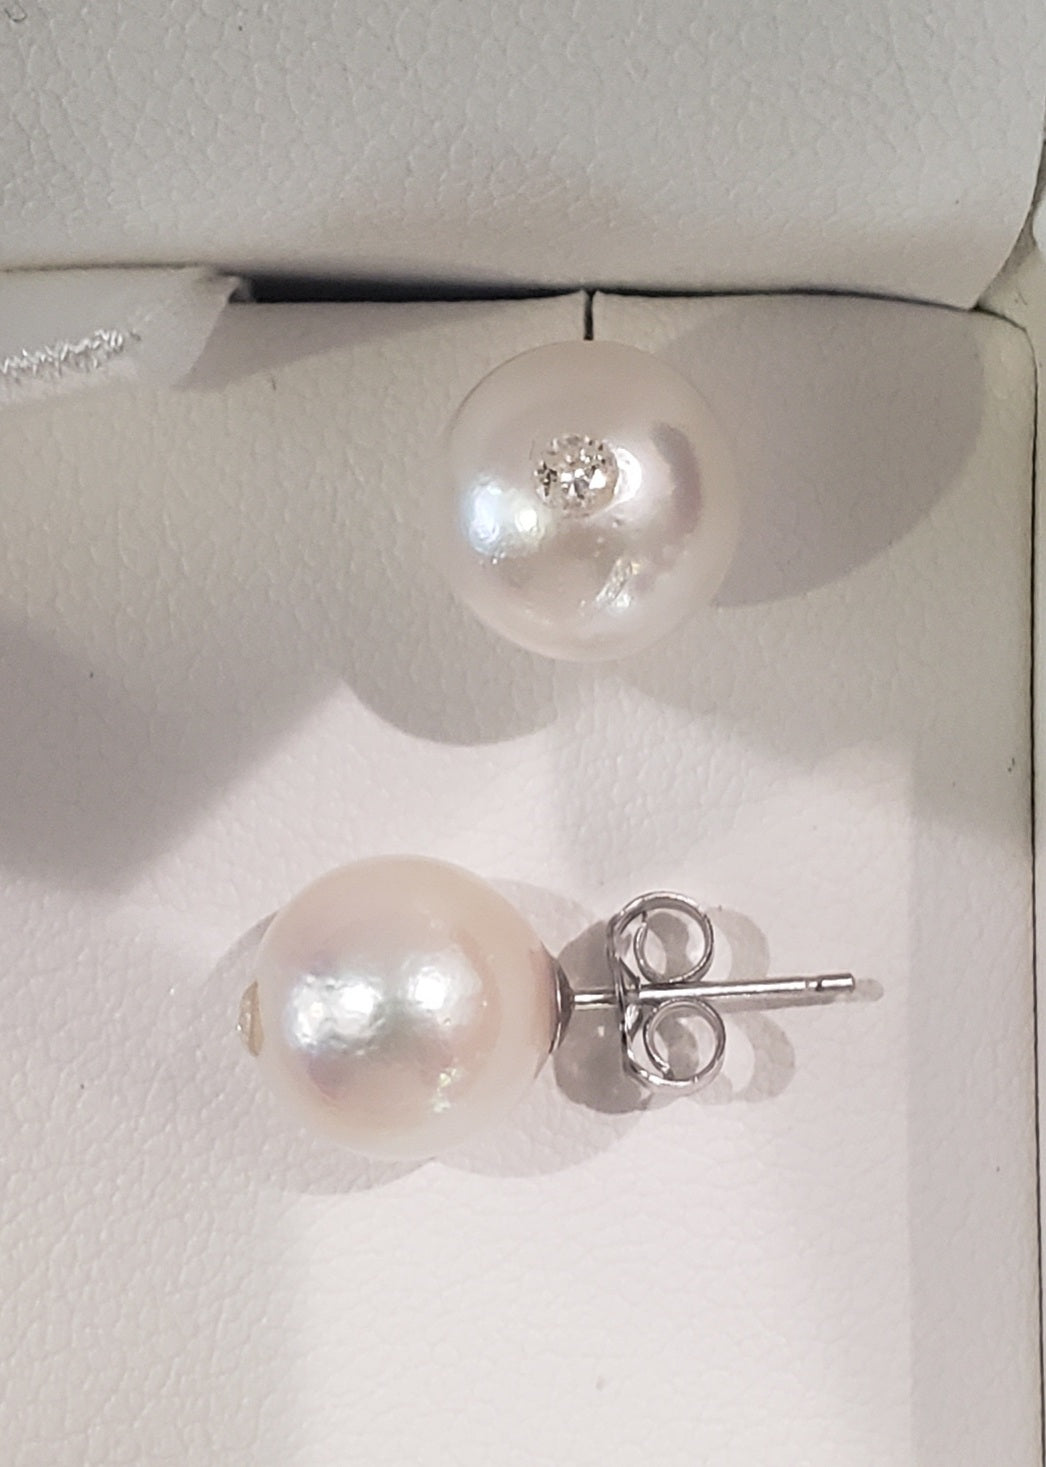 14K White Gold 8.5-9.0mm Cultured Pearl and 0.08cttw Diamond Earrings with Butterfly Backs